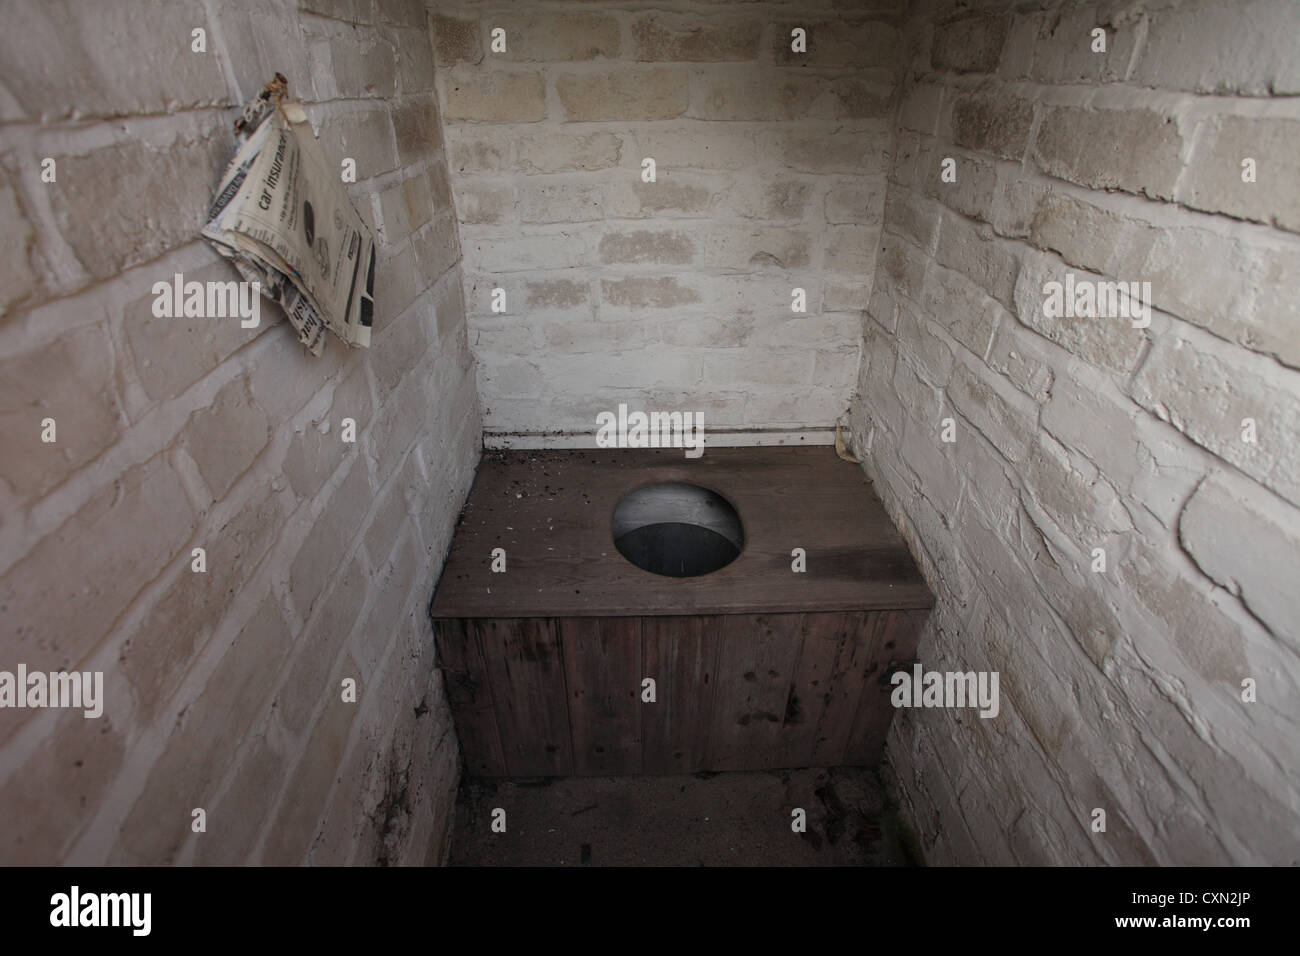 Early working class toilet of the soil type in a good preserved state. Stock Photo